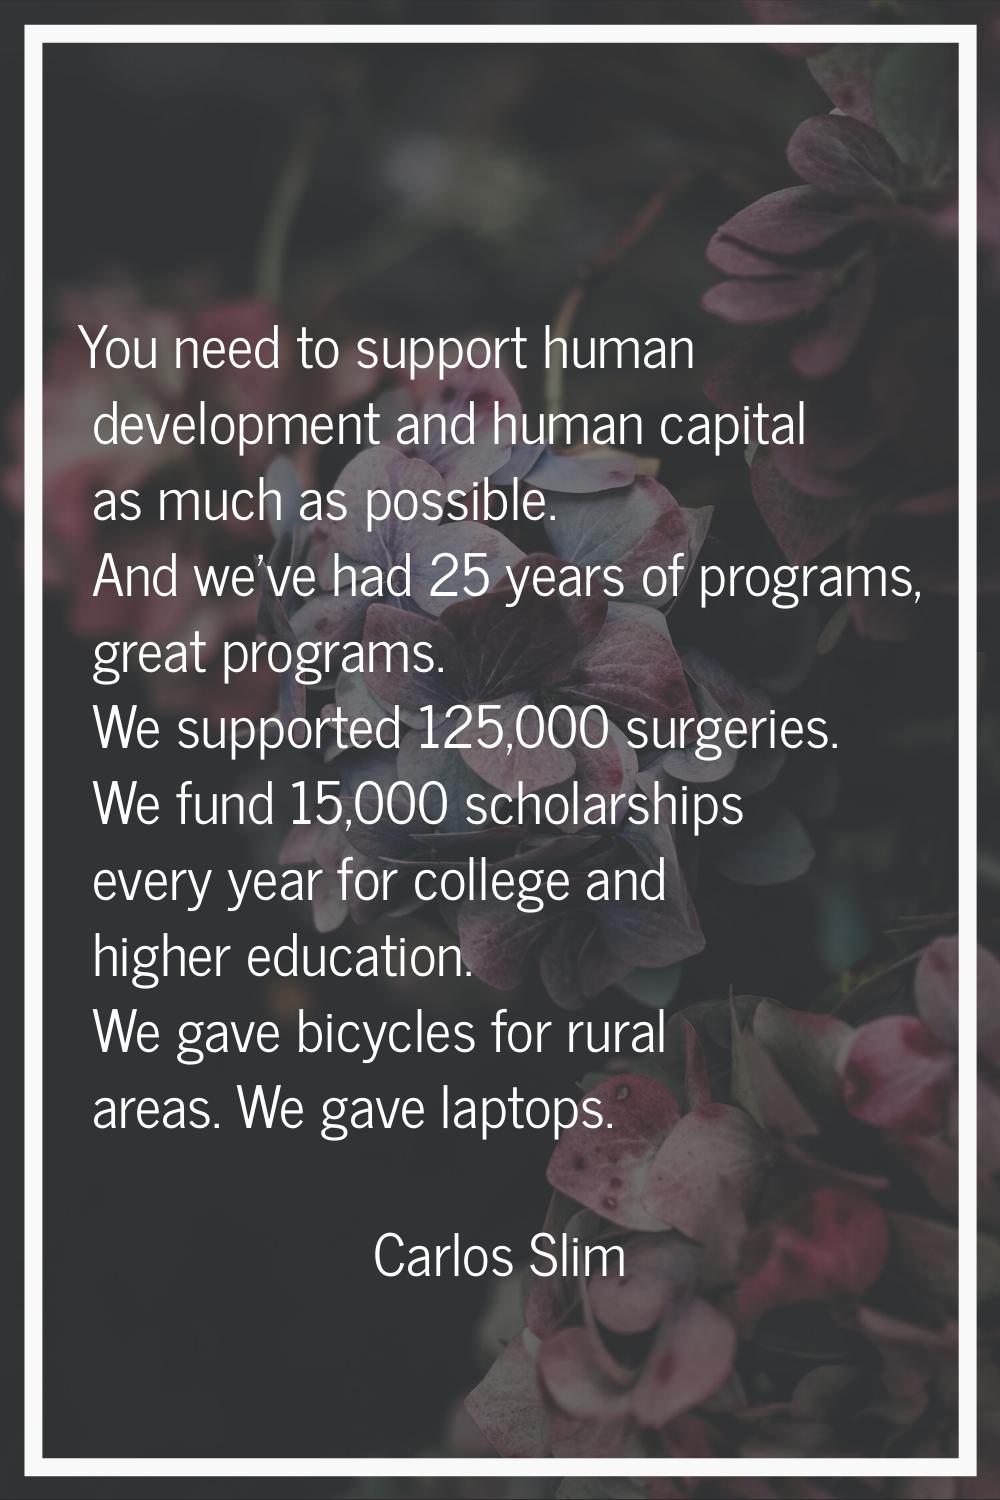 You need to support human development and human capital as much as possible. And we've had 25 years